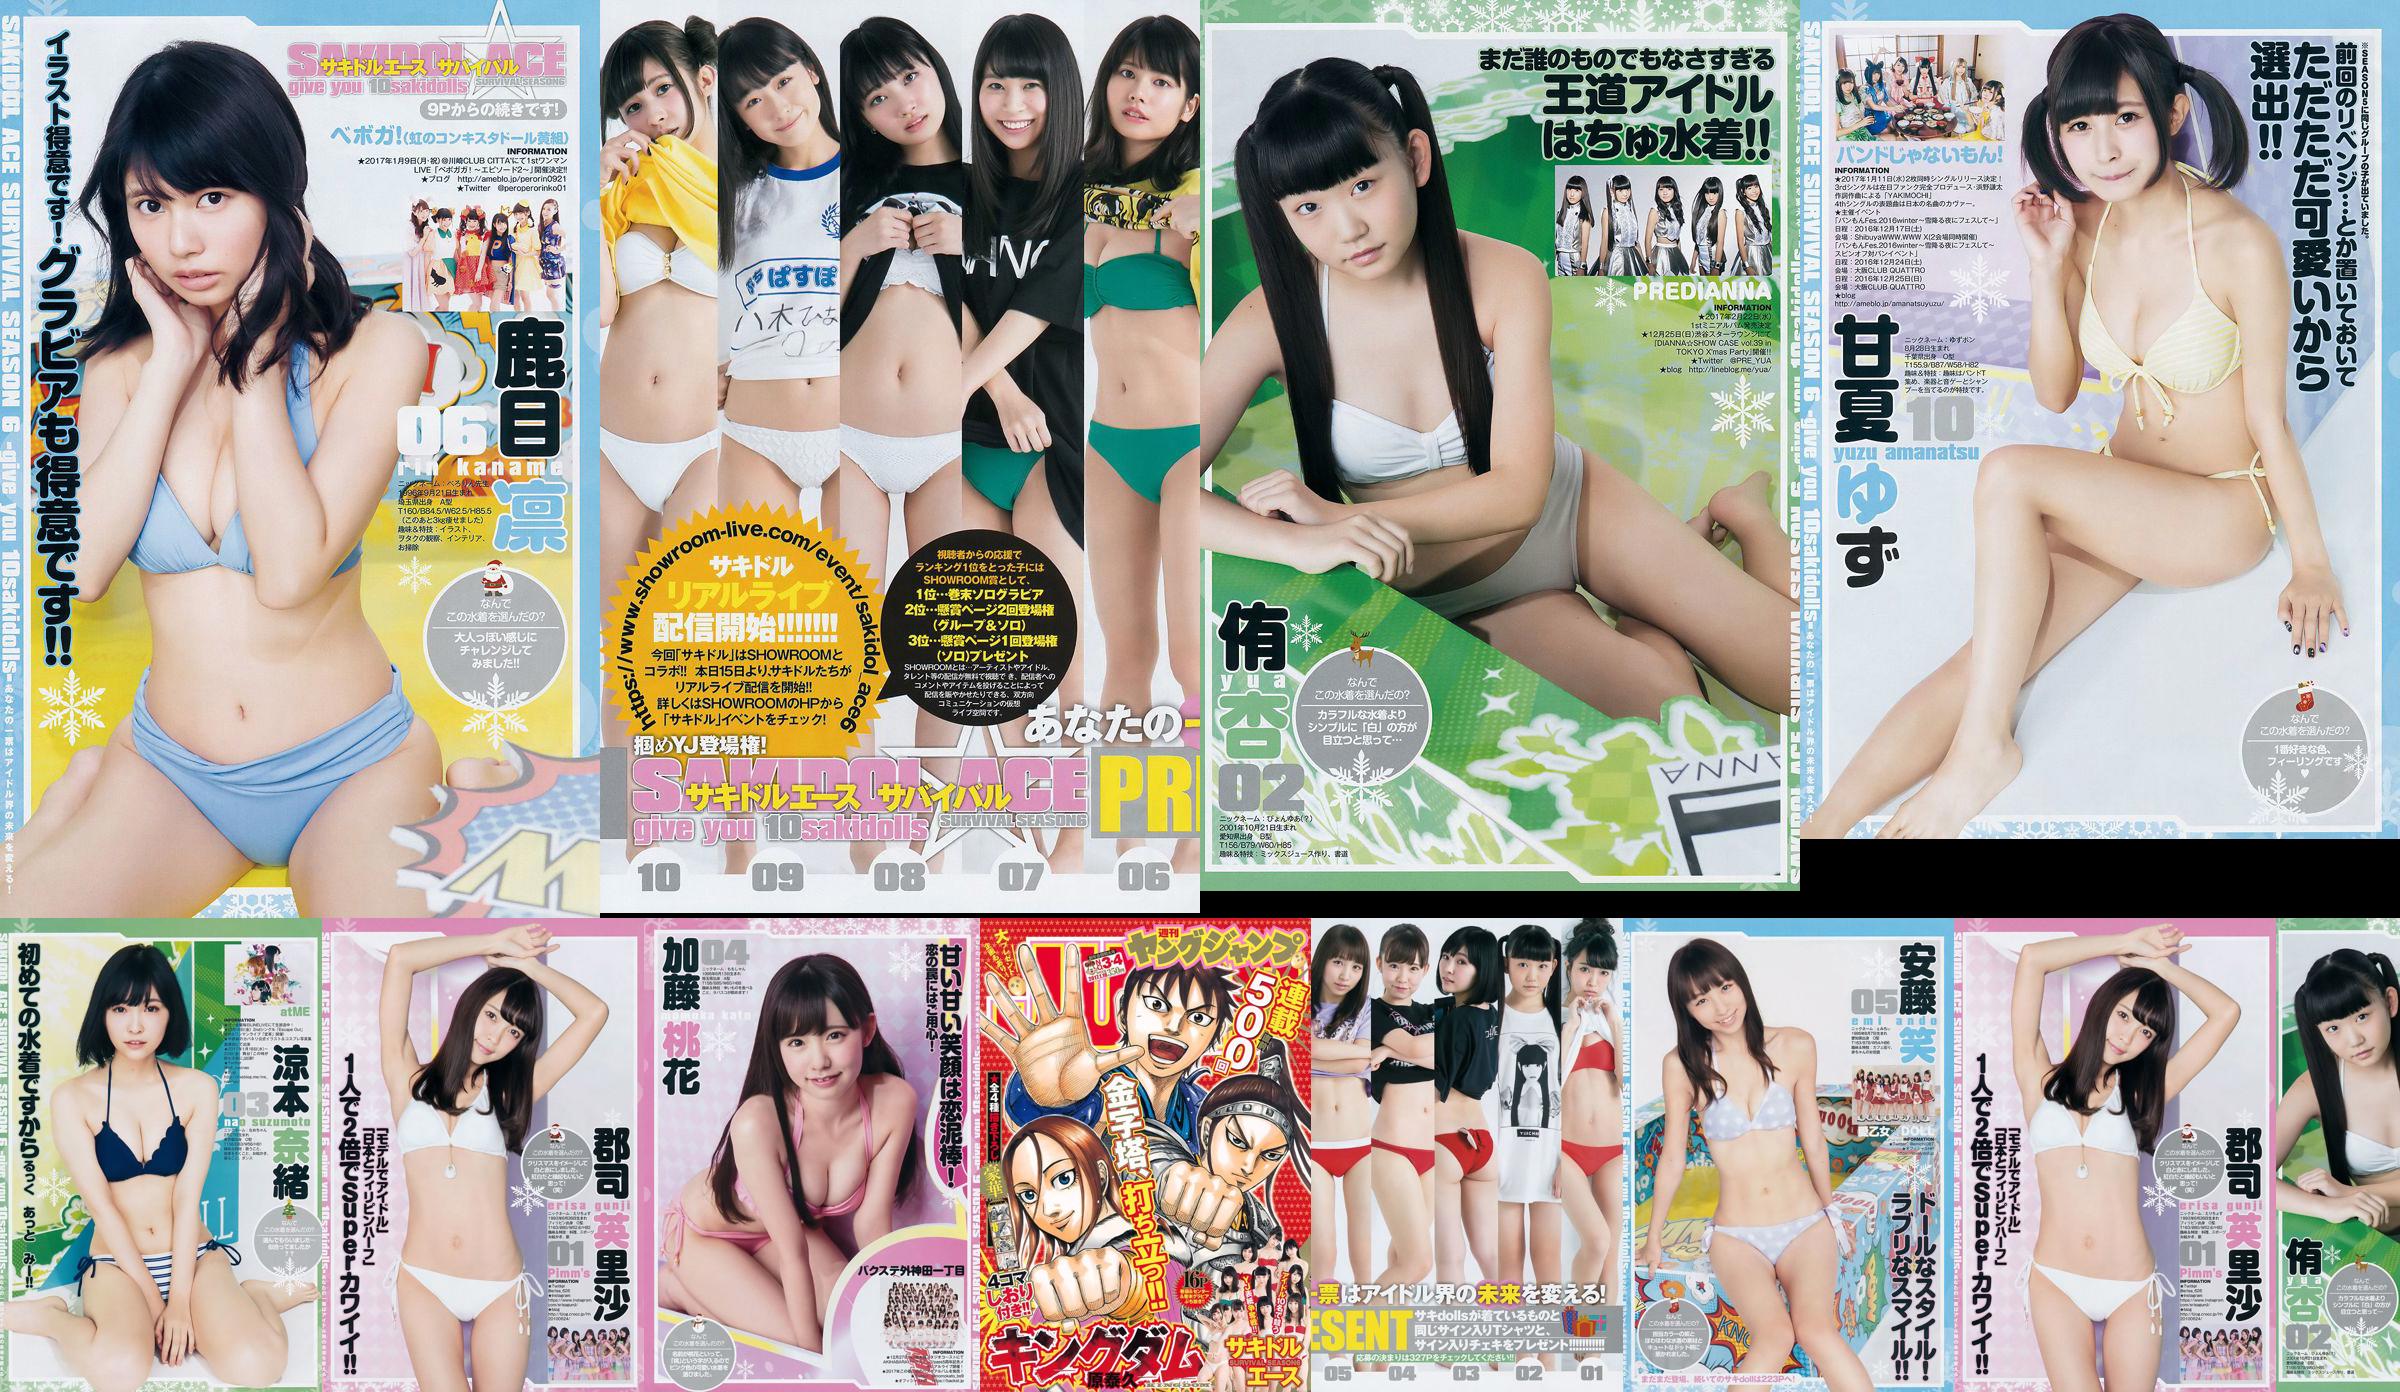 Sakidol Ace SURVIVAL SEASON6《 แจก 10sakidolls》 [Weekly Young Jump] 2017 No.03-04 Photo Magazine No.a41acd หน้า 1